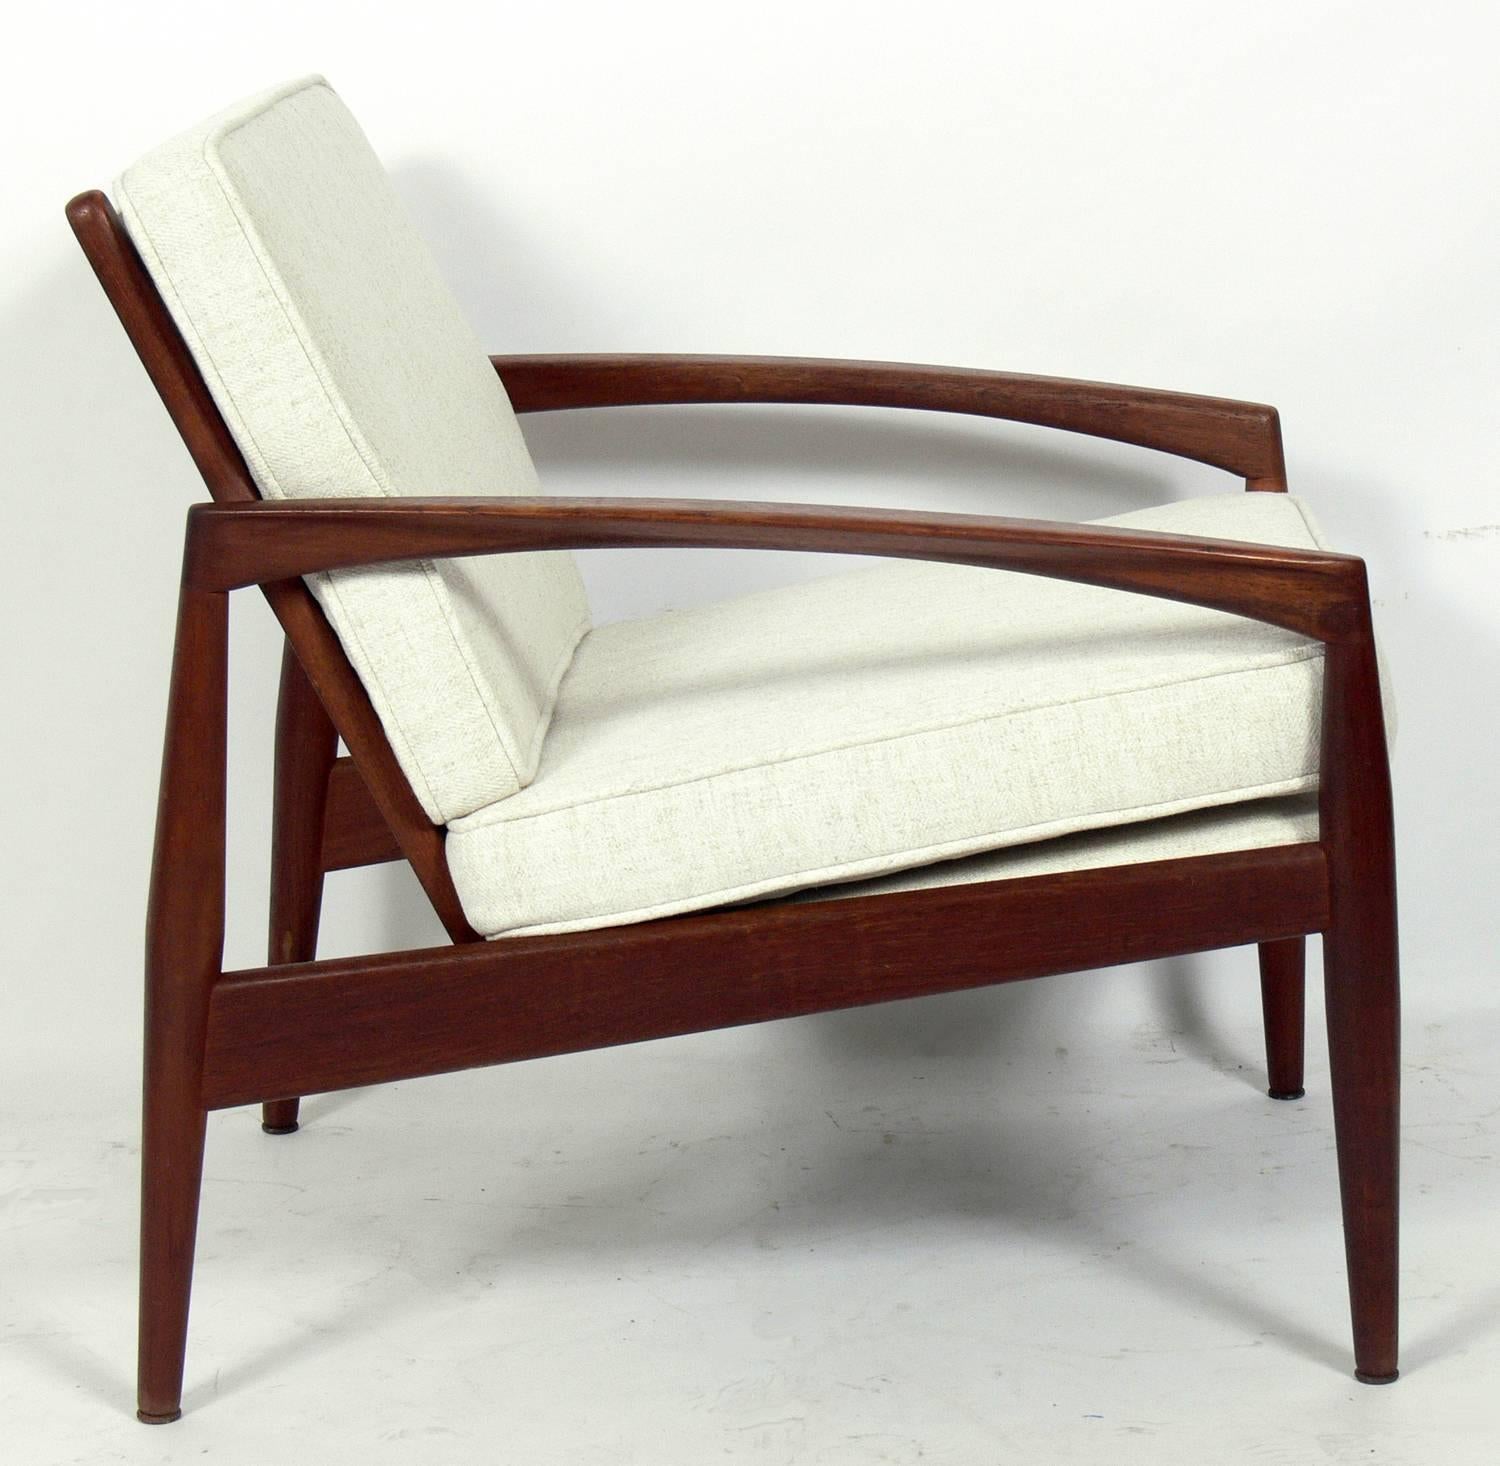 Danish modern paper knife lounge chair, designed by Kai Kristiansen for Magnus Olesen, Denmark, circa 1960s. This has been reupholstered in an ivory herringbone fabric. The chair itself retains it's original finish and has been recently teak oiled.